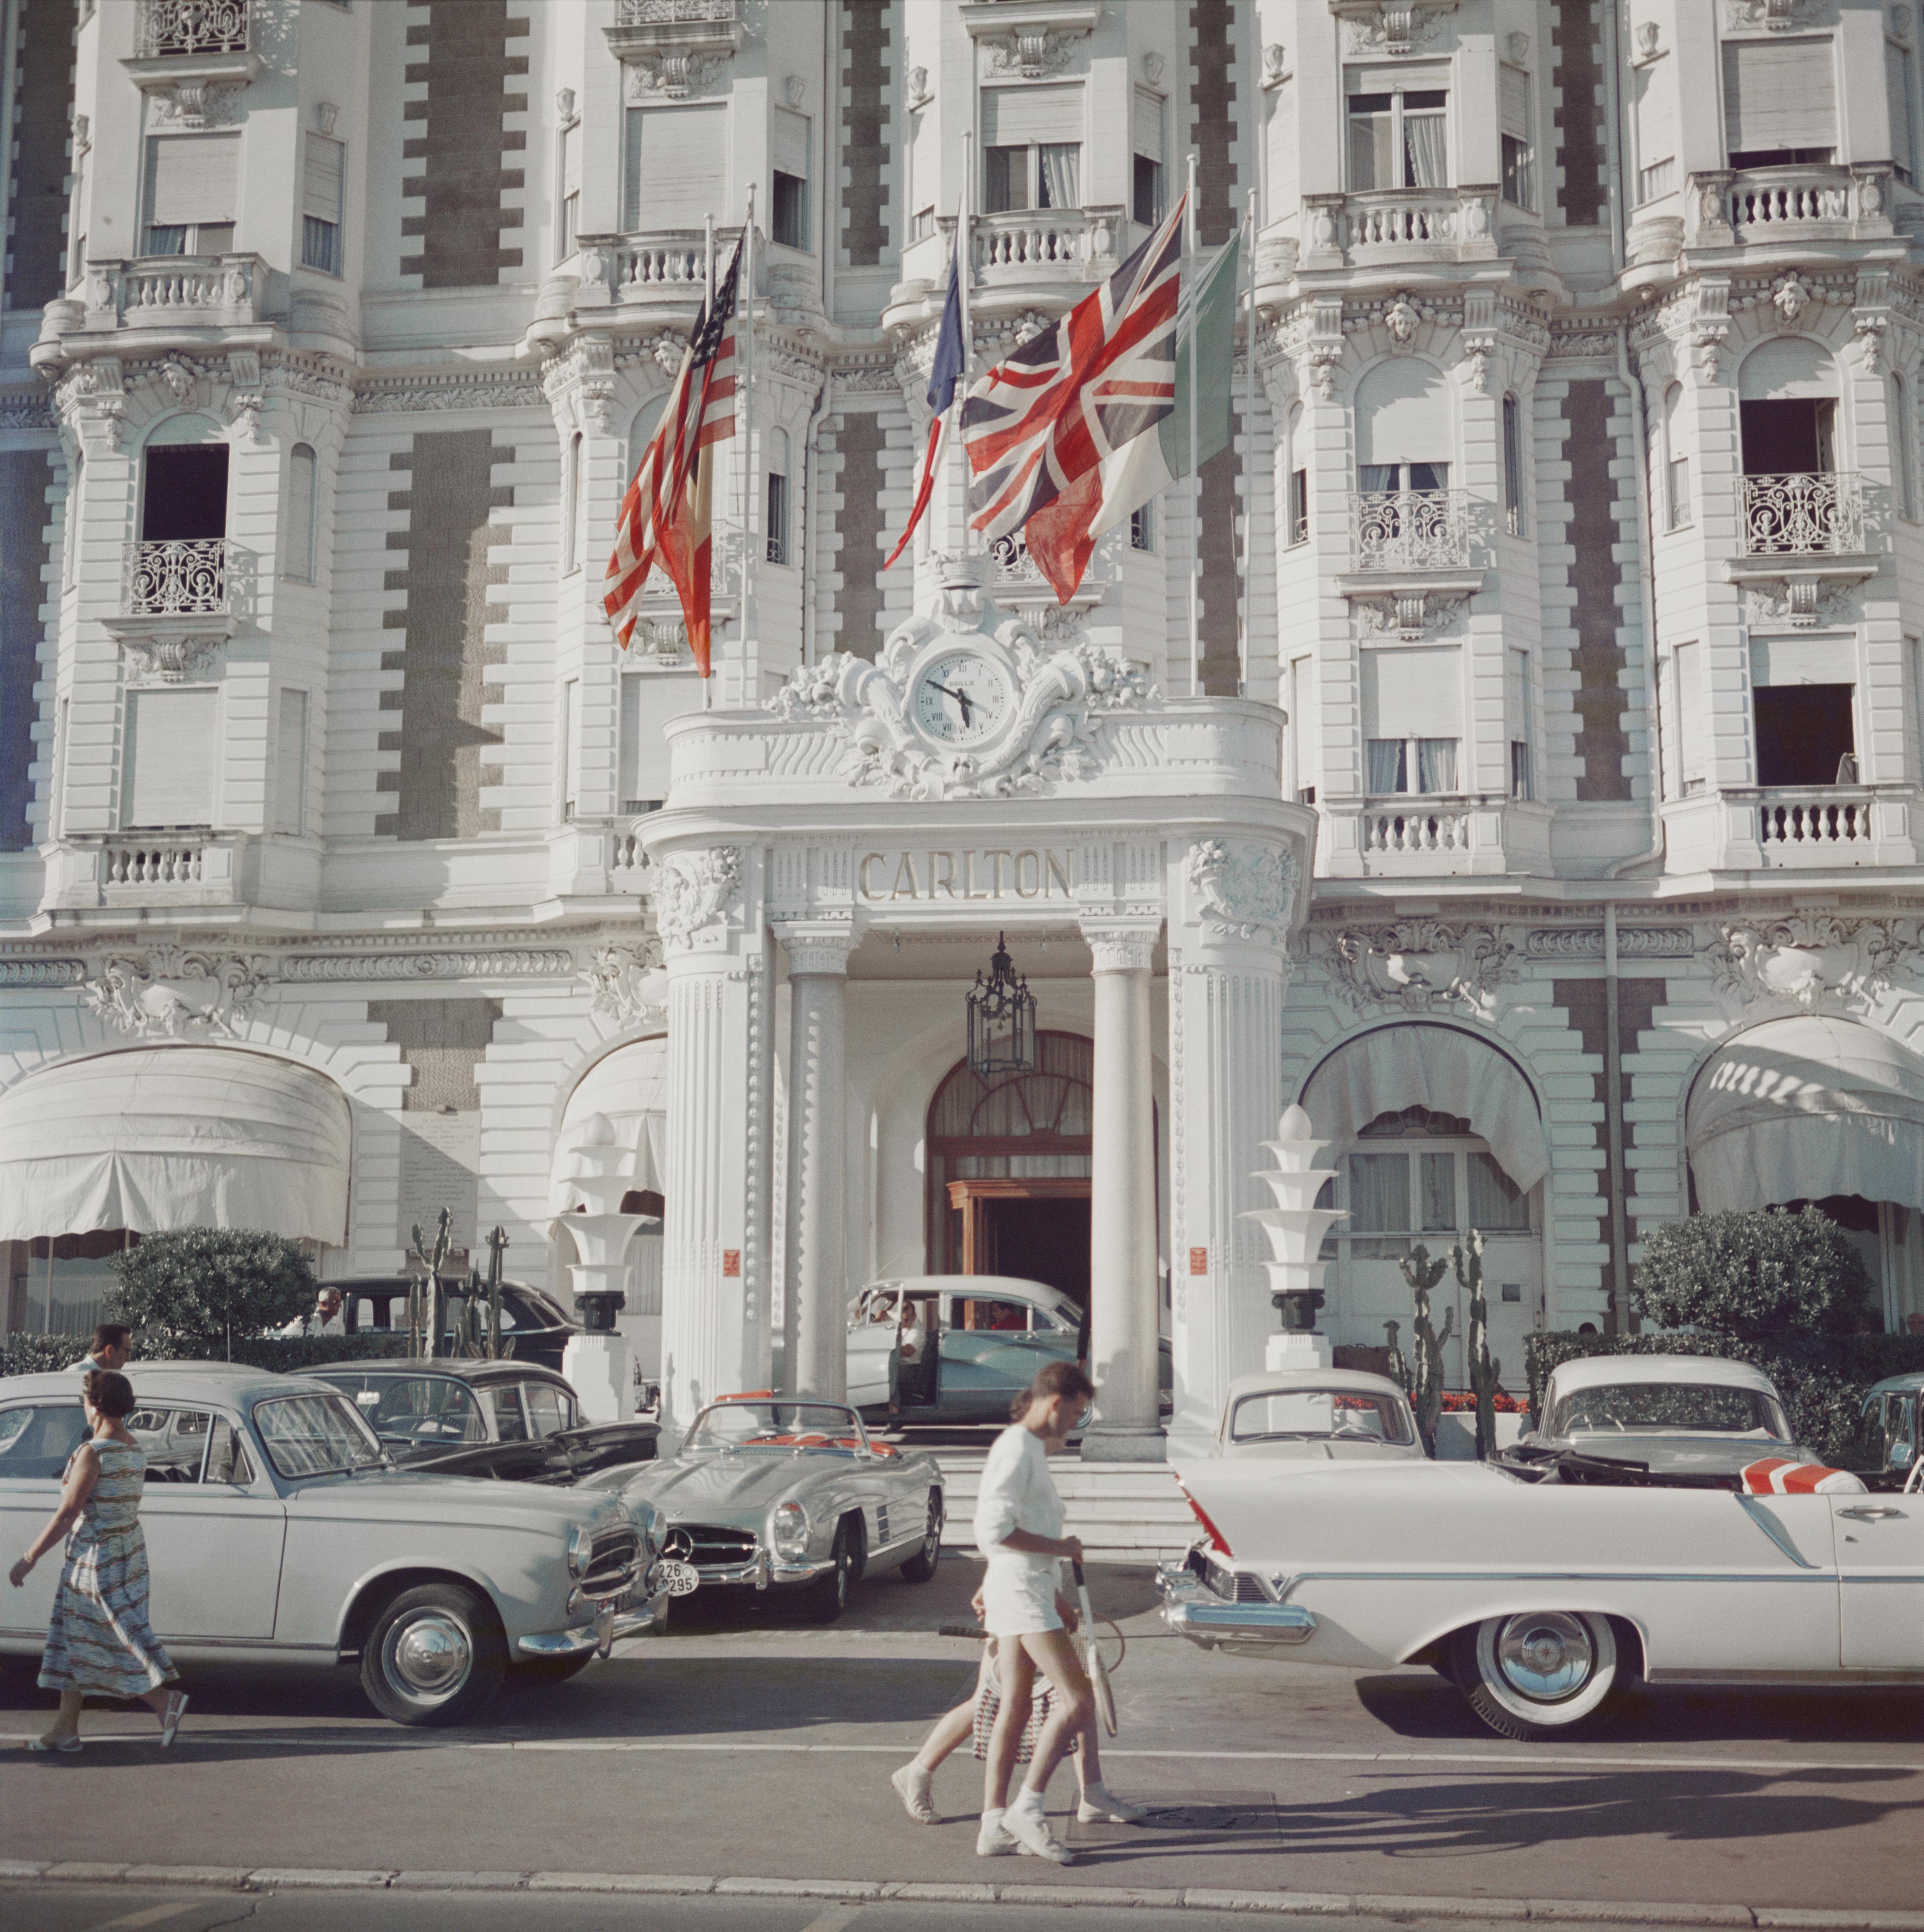 The entrance to the Carlton Hotel, Cannes, France, 1958. 

Slim Aarons
Carlton Hotel
Lambda Print
4 sizes available
Slim Aarons Estate Edition
Printed later.

60 x 60 inches
$5100

48 x 48 inches
$4500

40 x 40 inches
$3950

30 x 30 inches
$3350

20